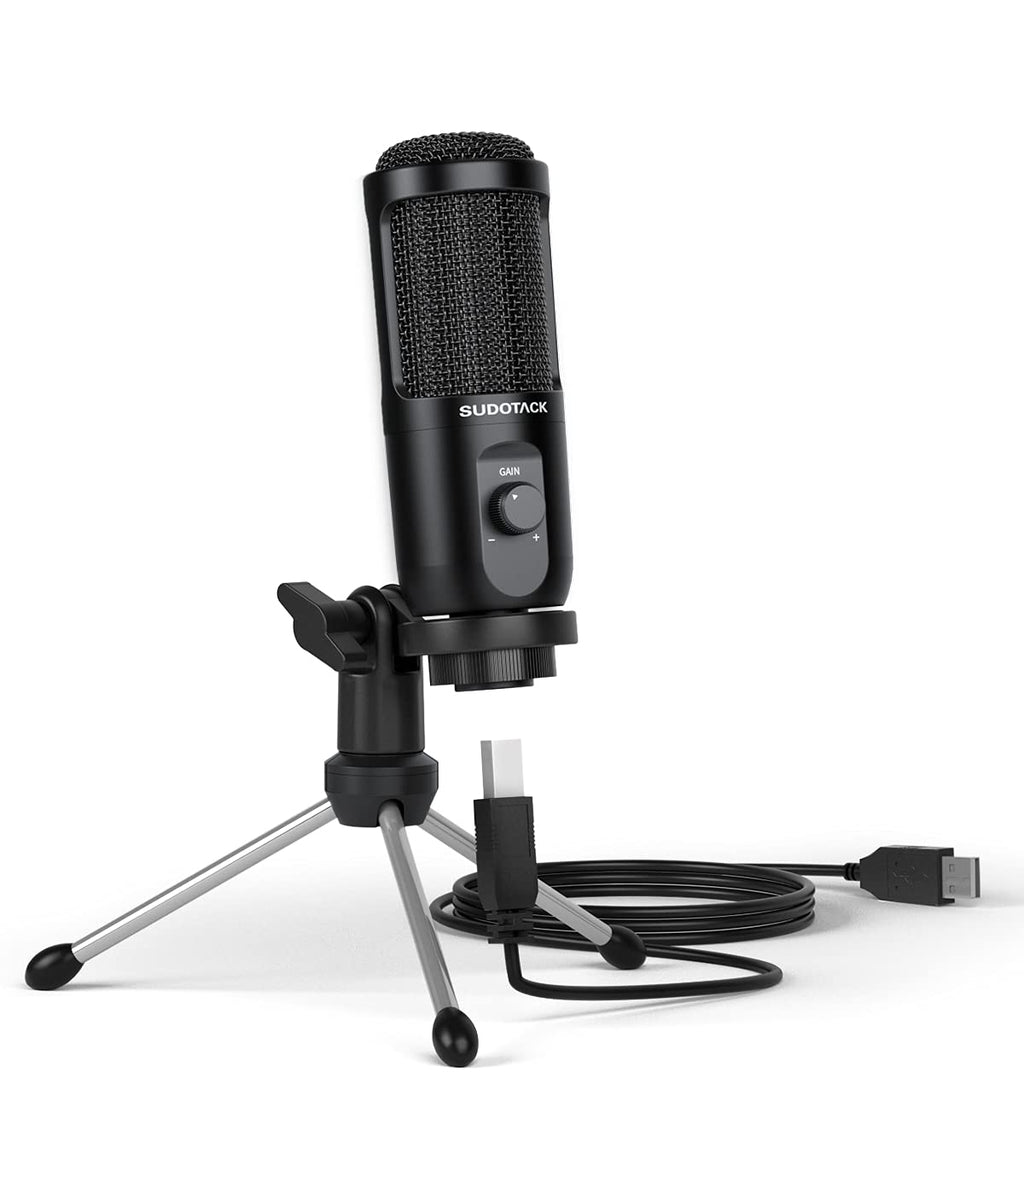 USB Computer Microphone, SUDOTACK PC Condenser Mic With Mic Gain for Gaming, Streaming, Recording, Podcast, Voice Overs, Zoom, Youtube, Compatible with Laptop Desktop Windows macOS (ST-600)